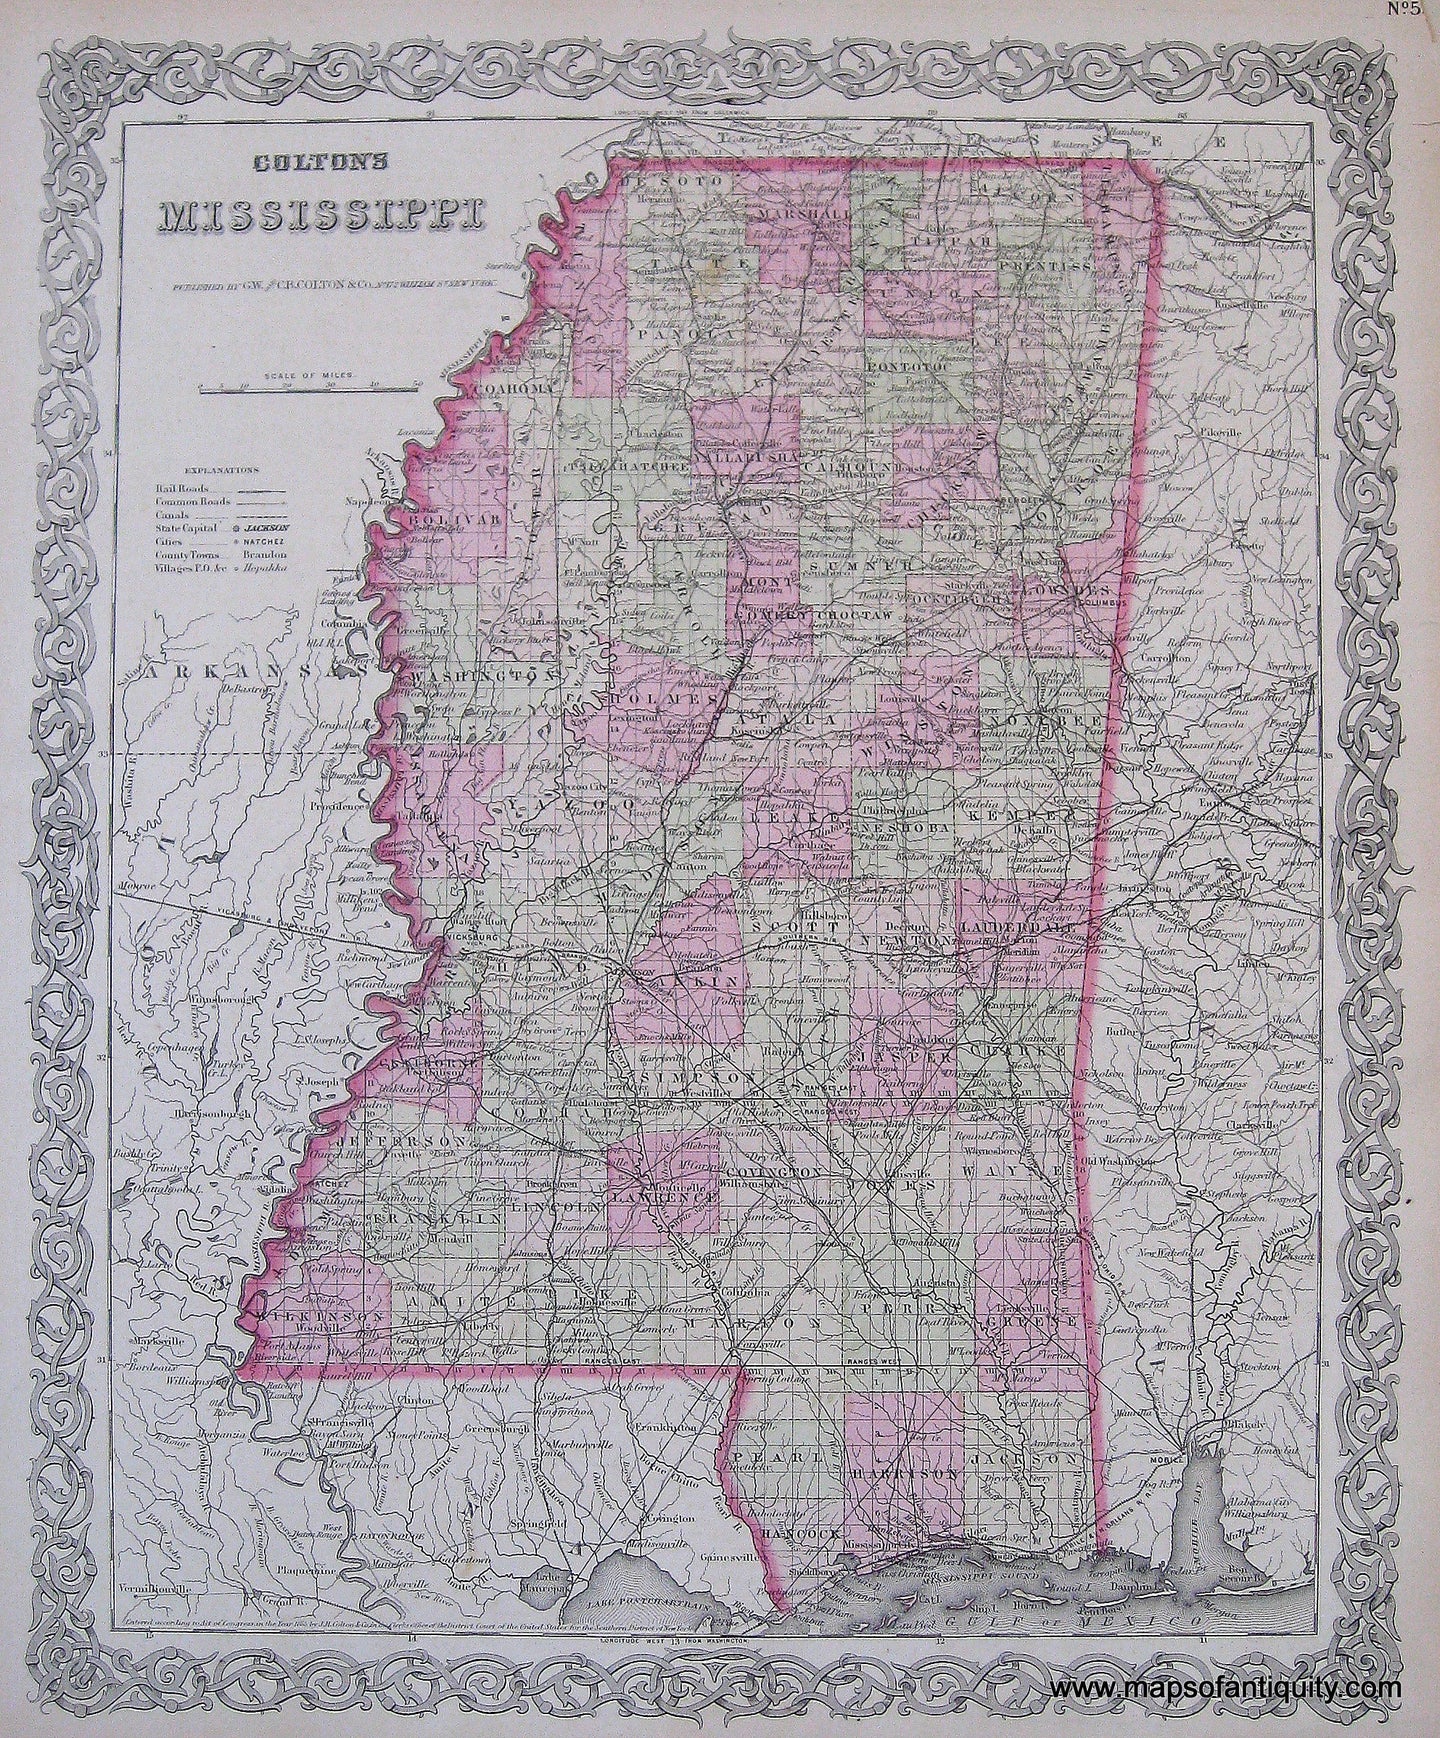 Antique-Hand-Colored-Map-Coltons-Mississippi-1874-Colton-Maps-Of-Antiquity